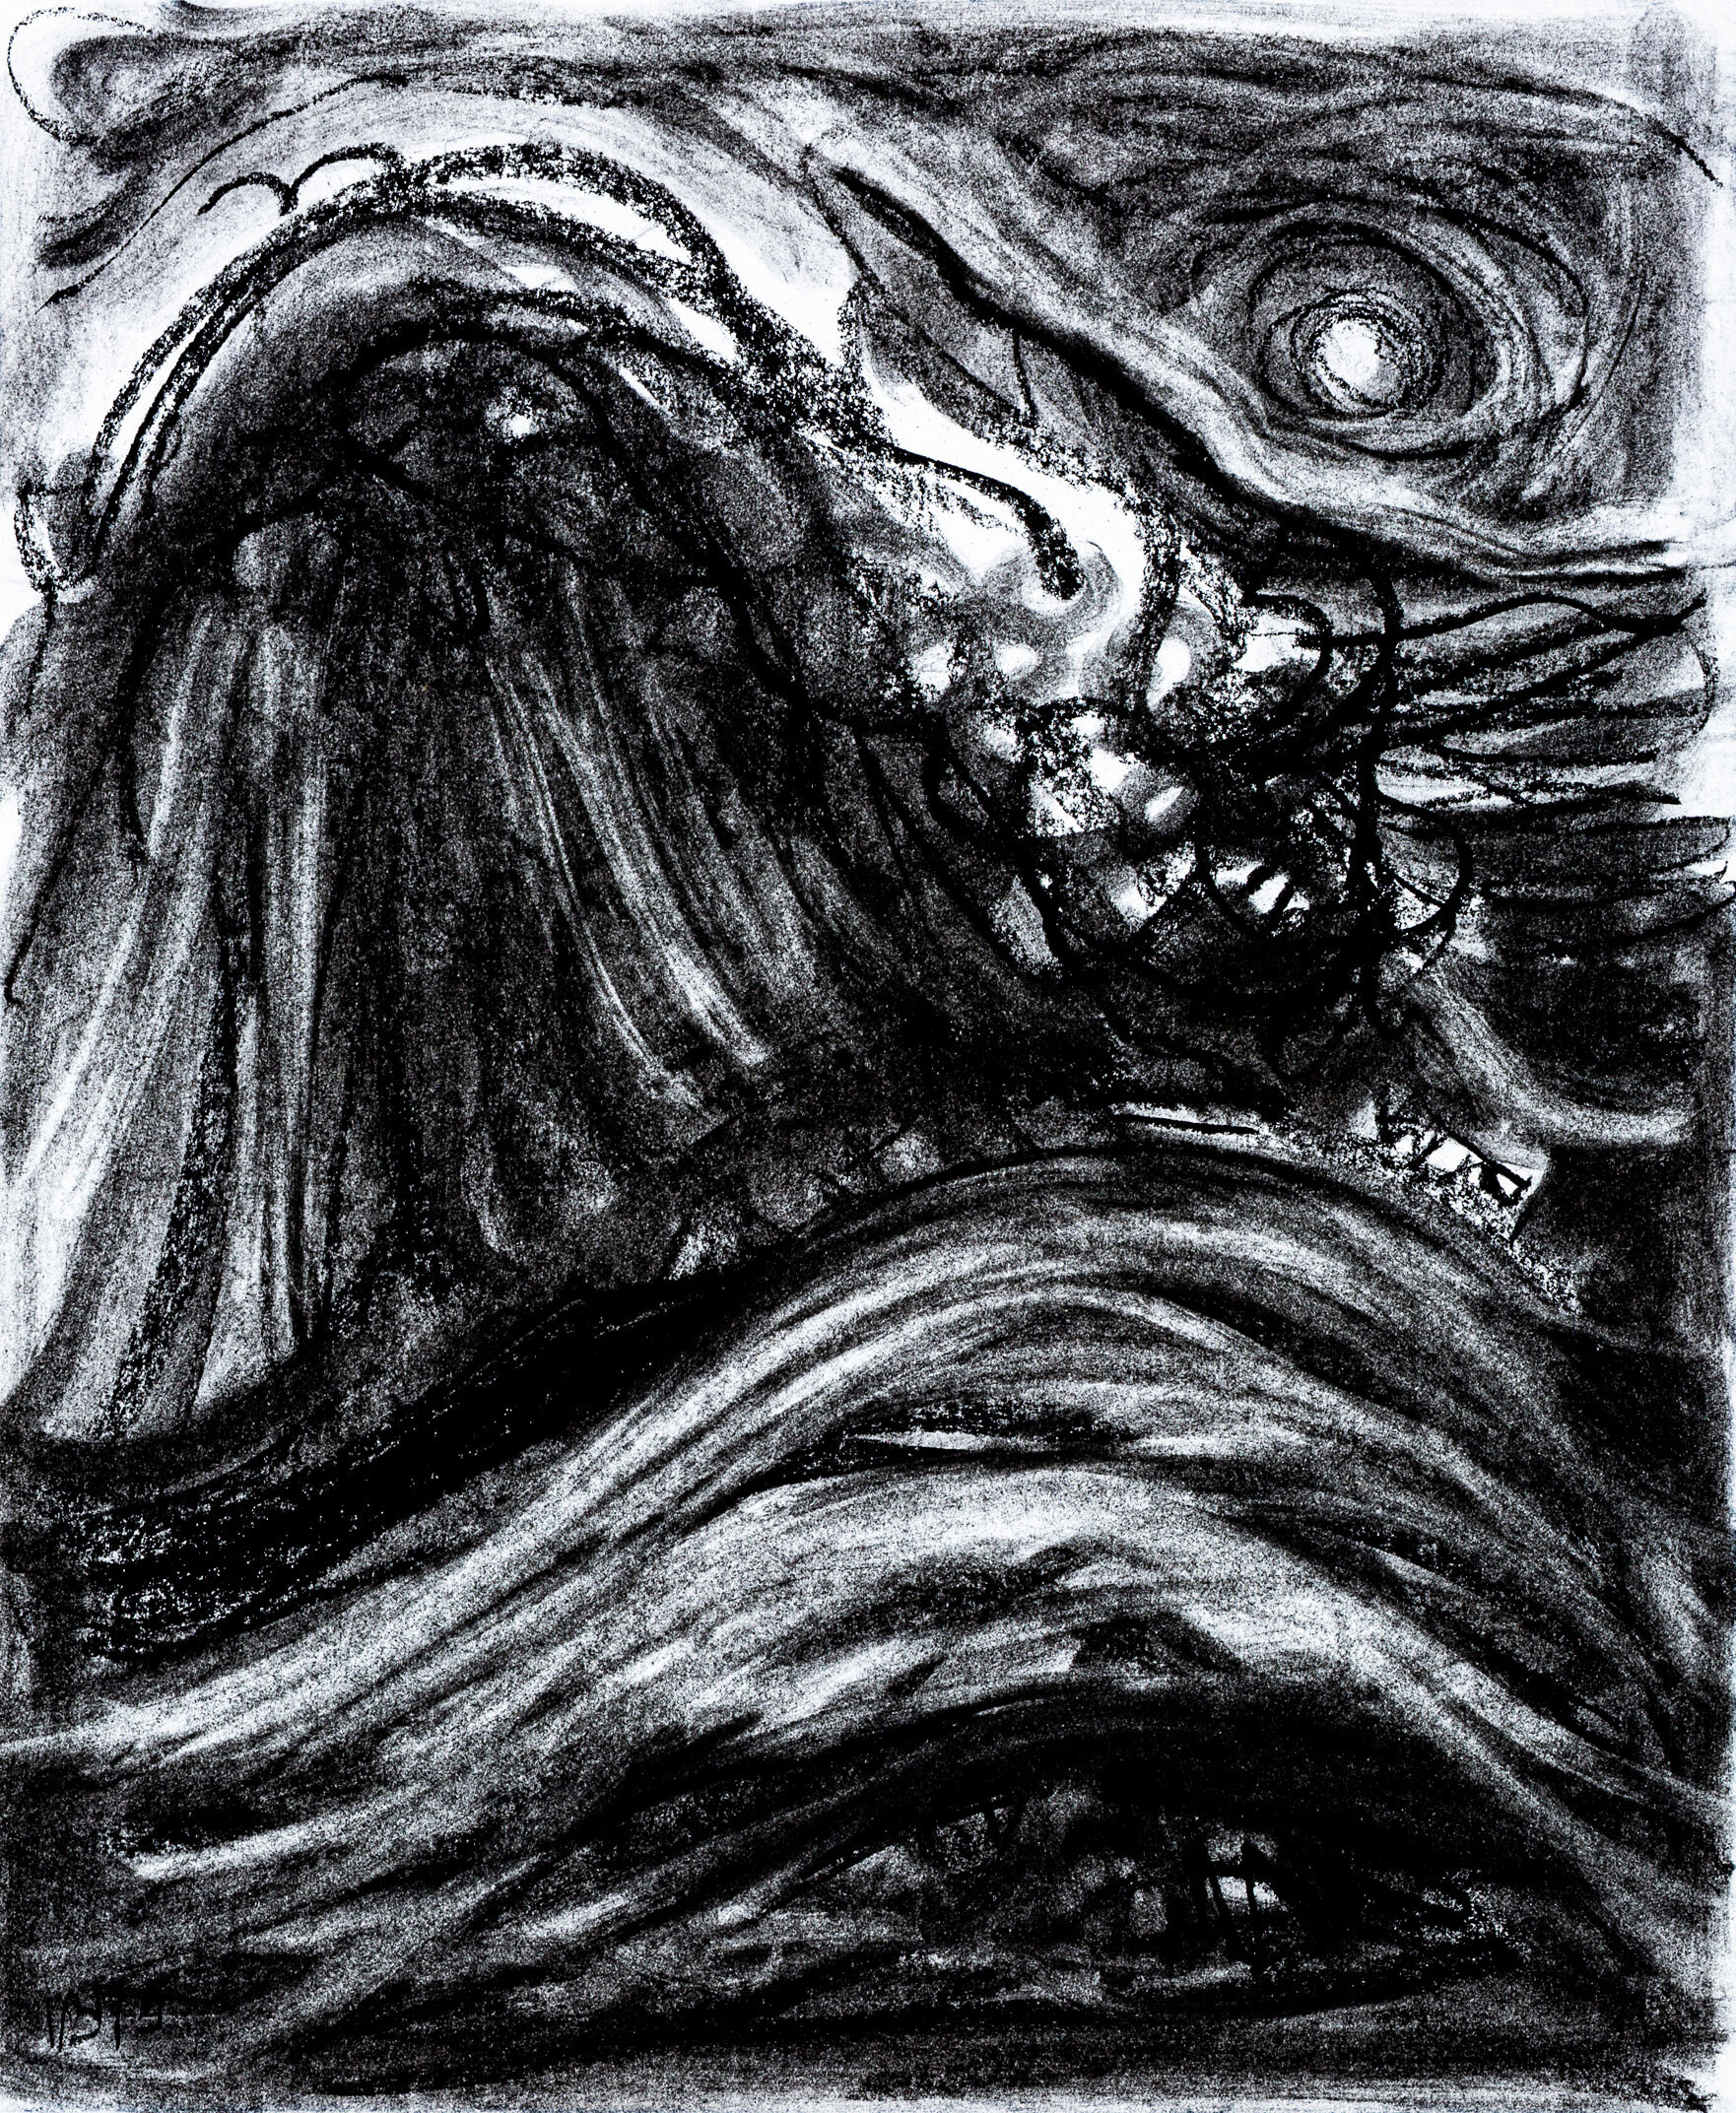 Rogue Wave, 2019 - charcoal on paper, 14x17in